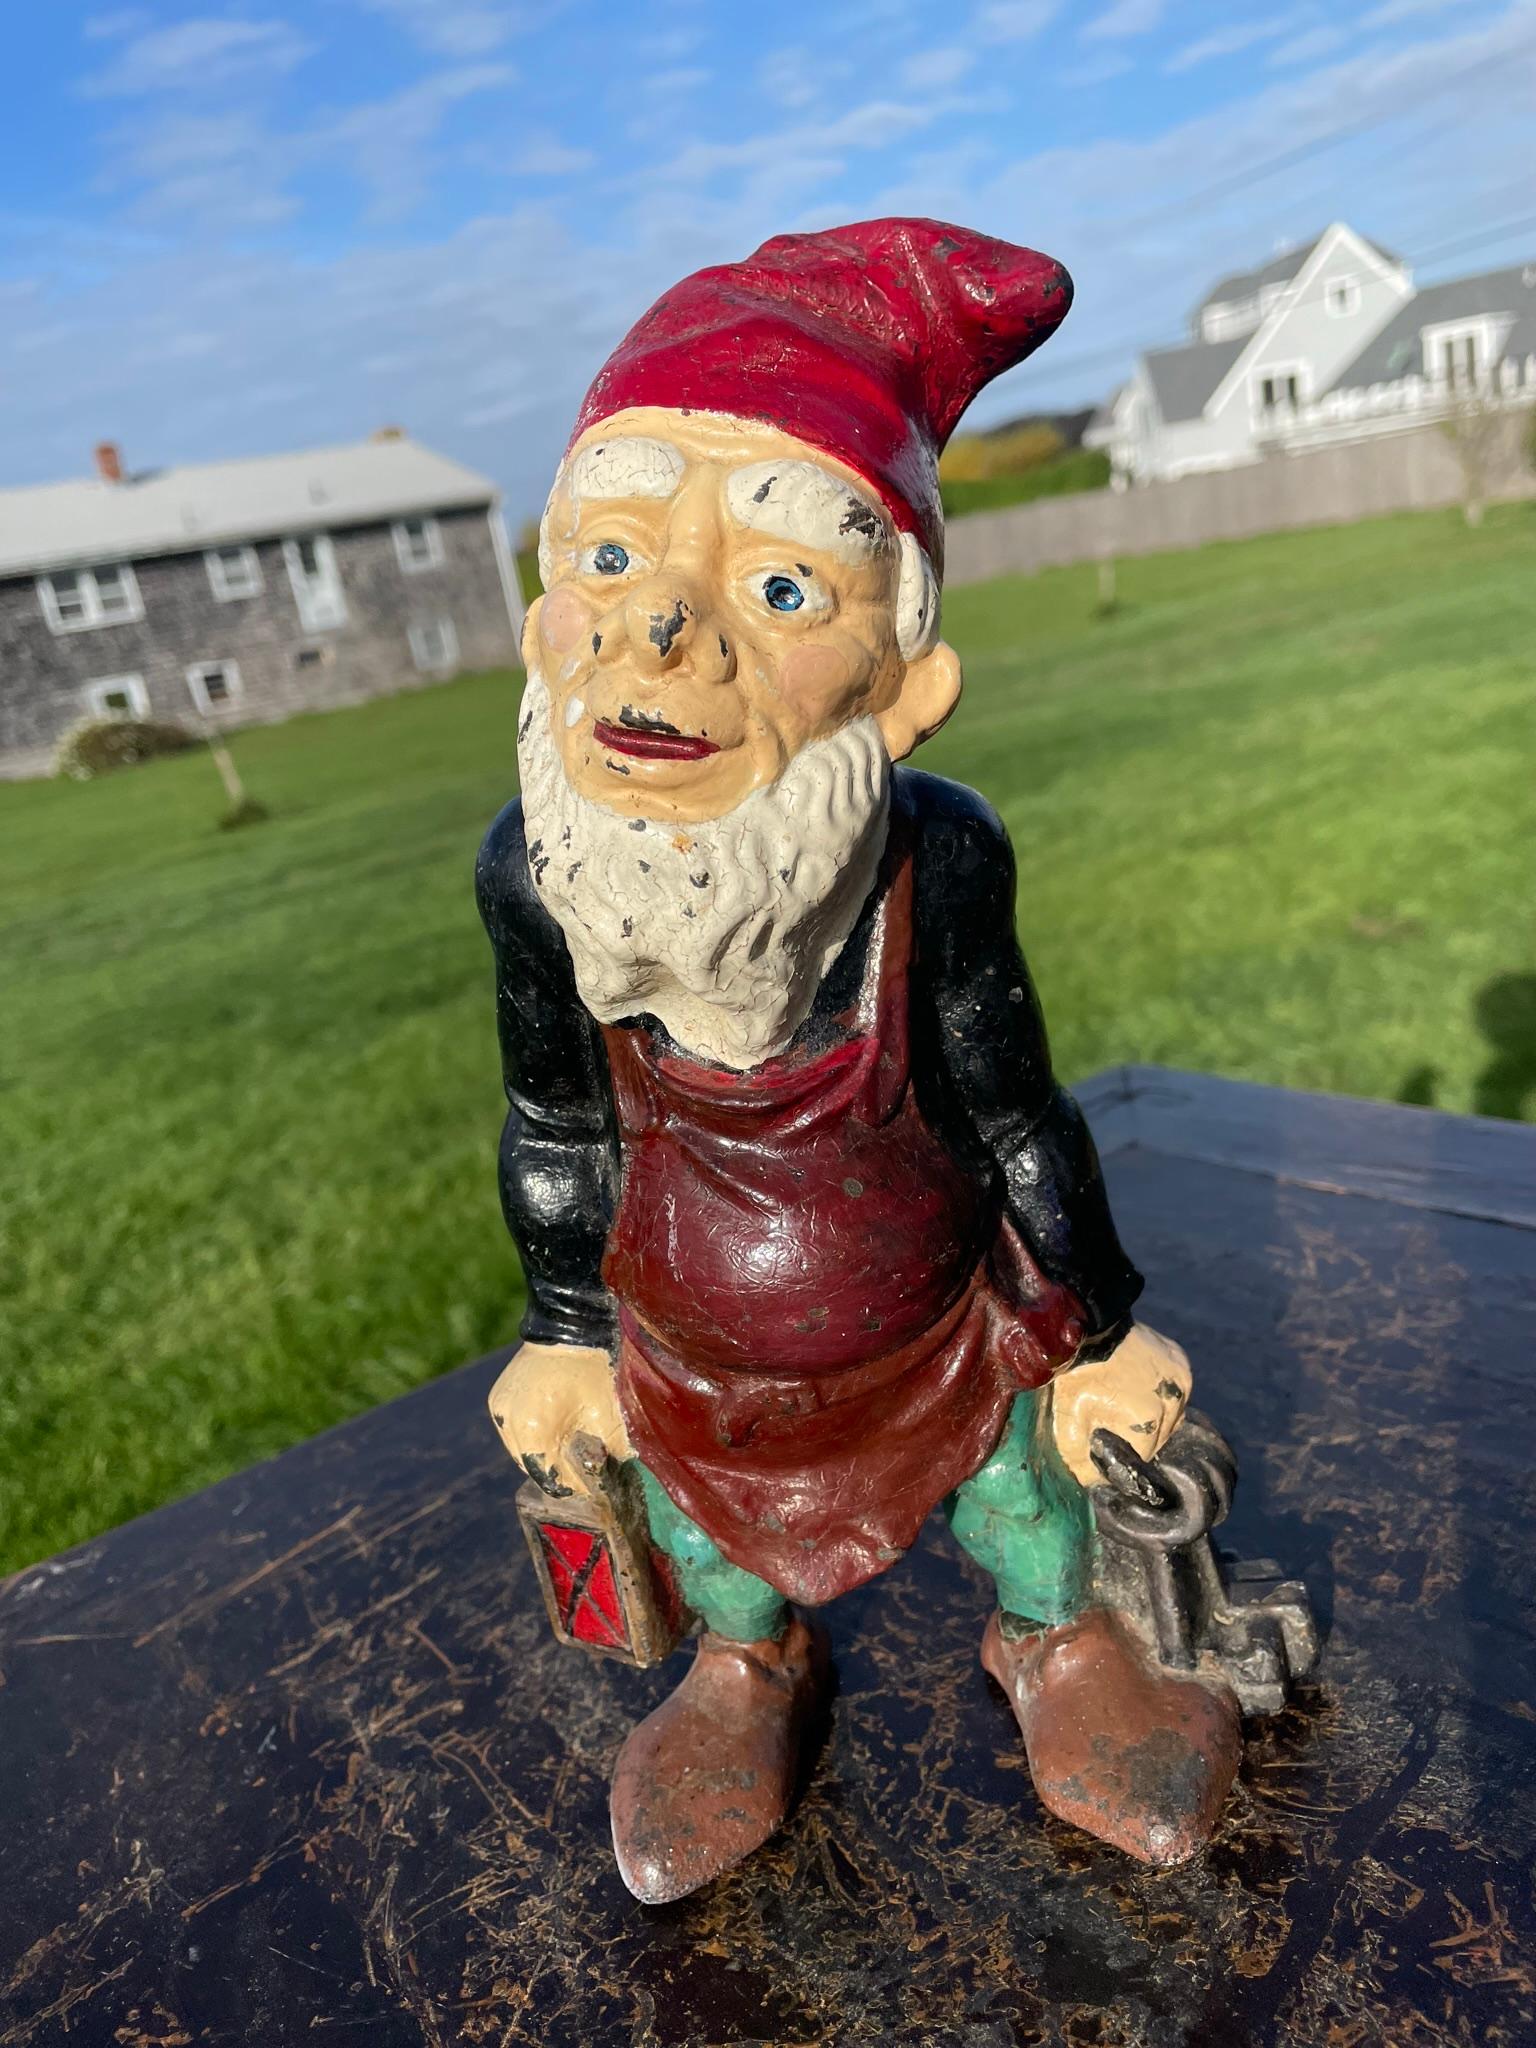 American Gnome Festive Red And Green Lantern Sculpture 